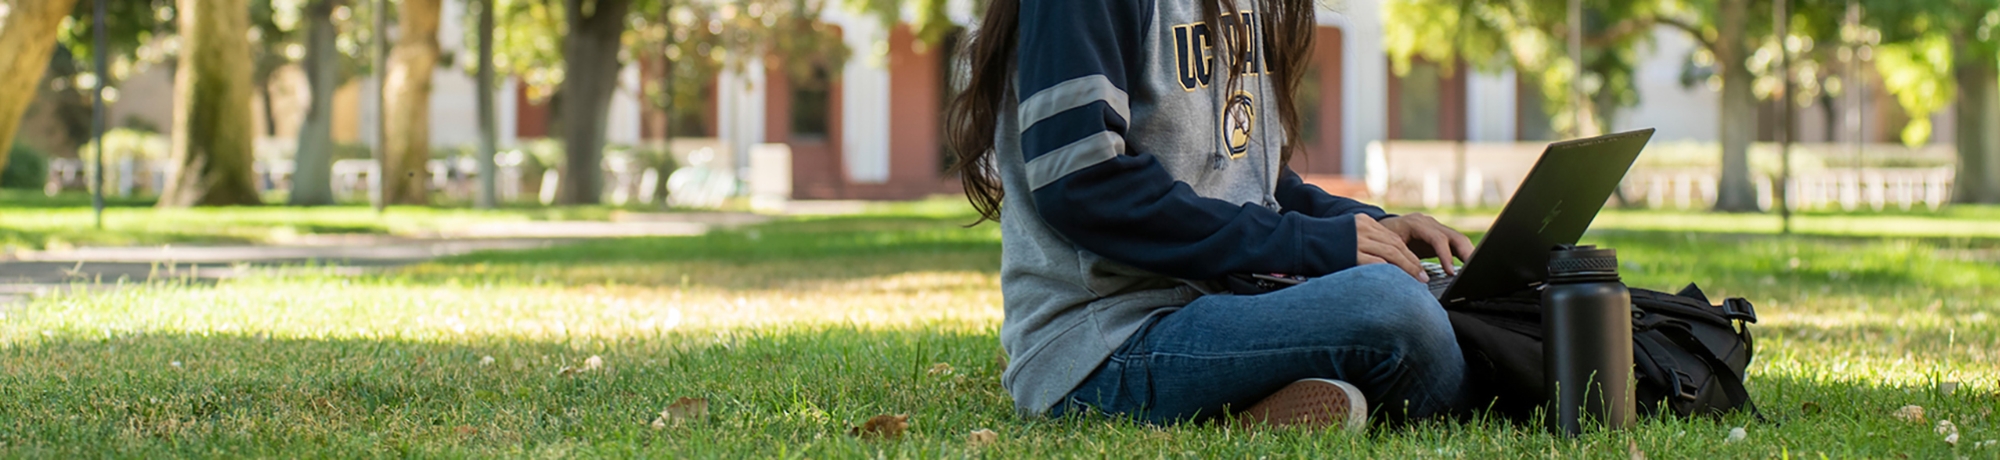 Student with UC Davis hoodie sitting criss crossed on the grass on campus using the computer on their lap.